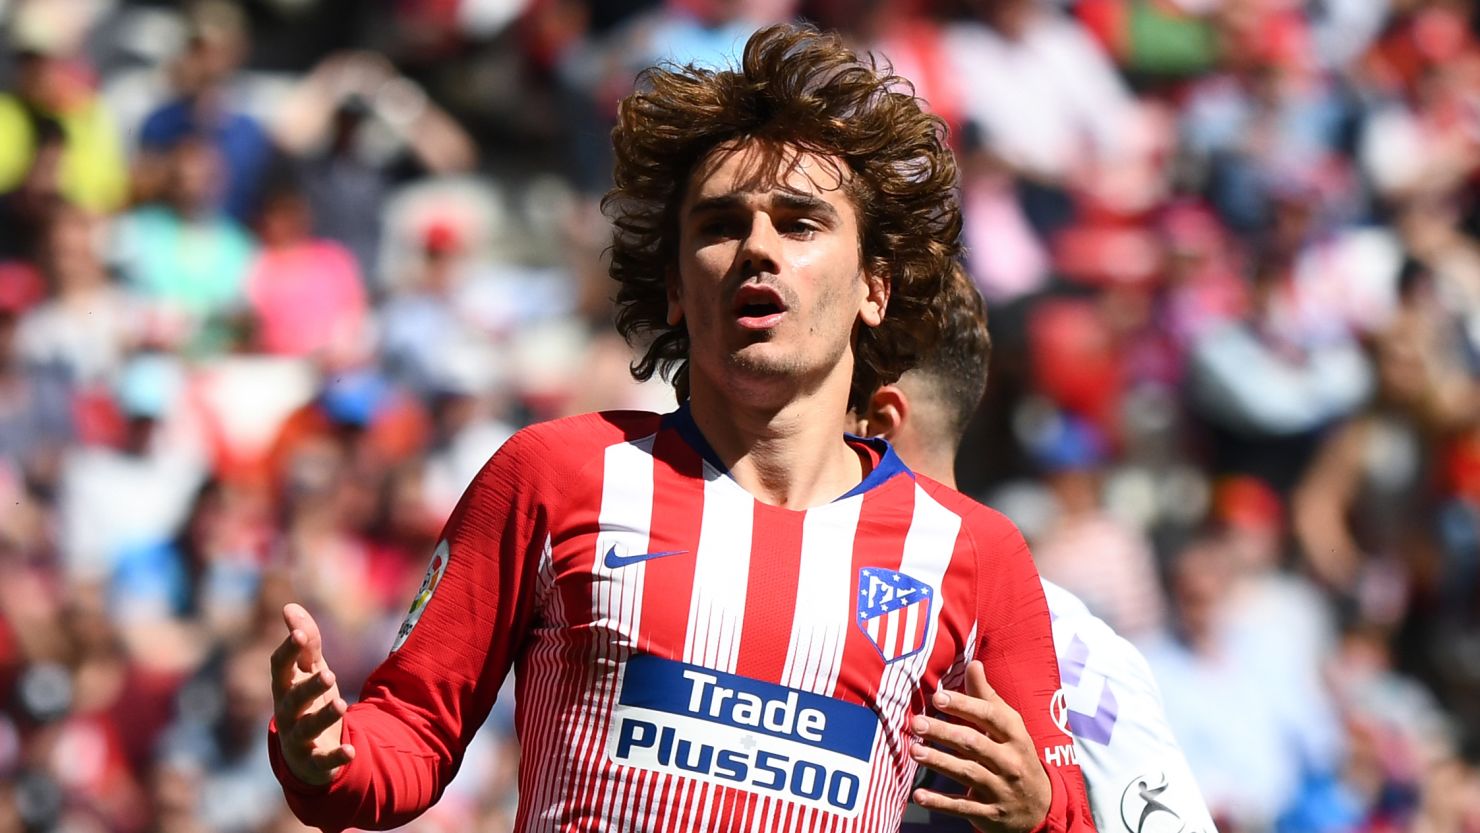 Atletico Madrid's French forward Antoine Griezmann has signed for Barcelona.